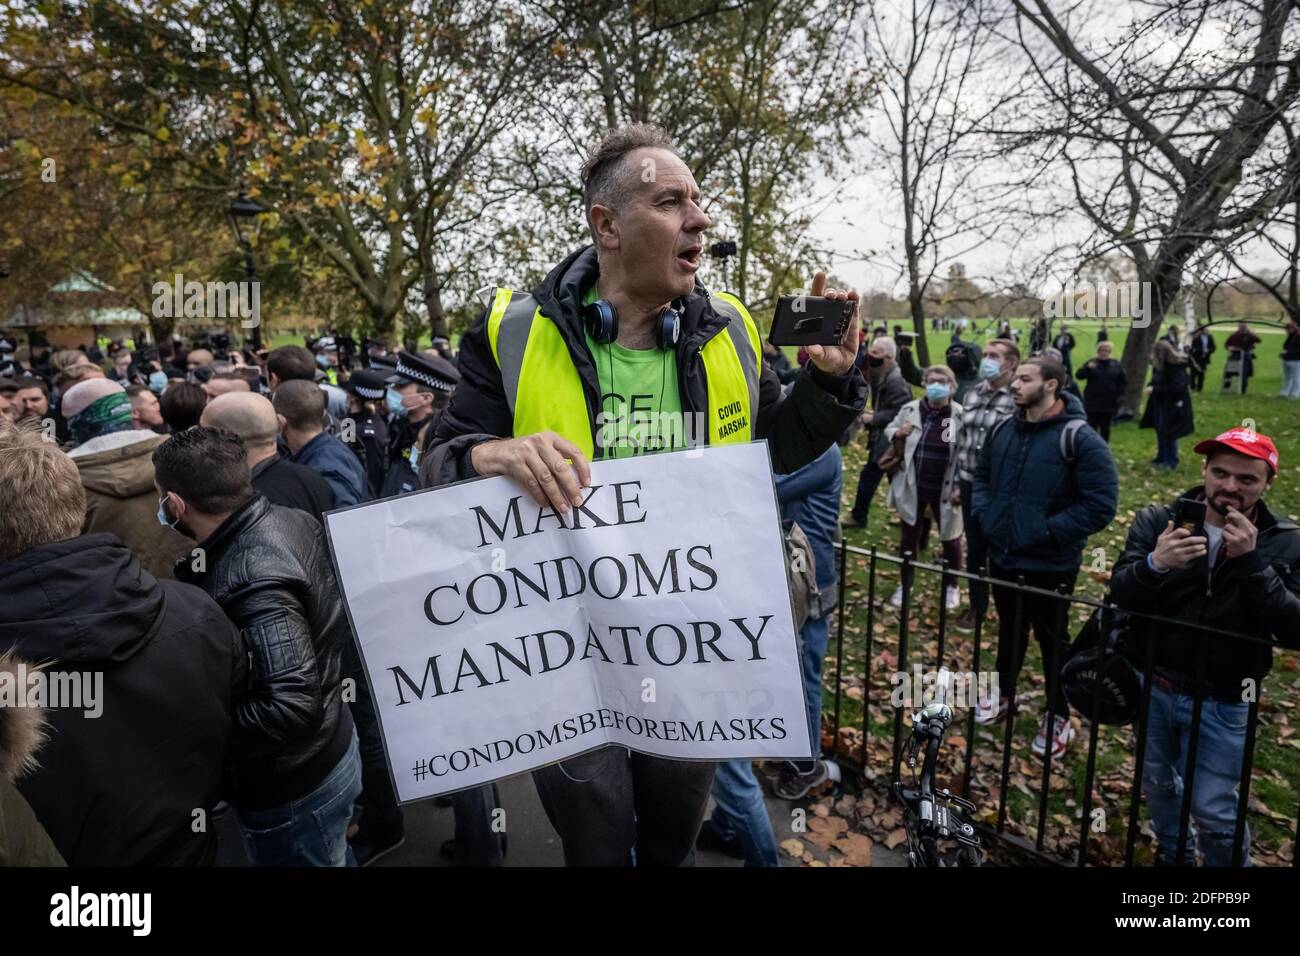 Danny Shine joins the crowds. Preaching, debates and sermons at Speakers’ Corner, the public speaking north-east corner of Hyde Park. London, UK. Stock Photo